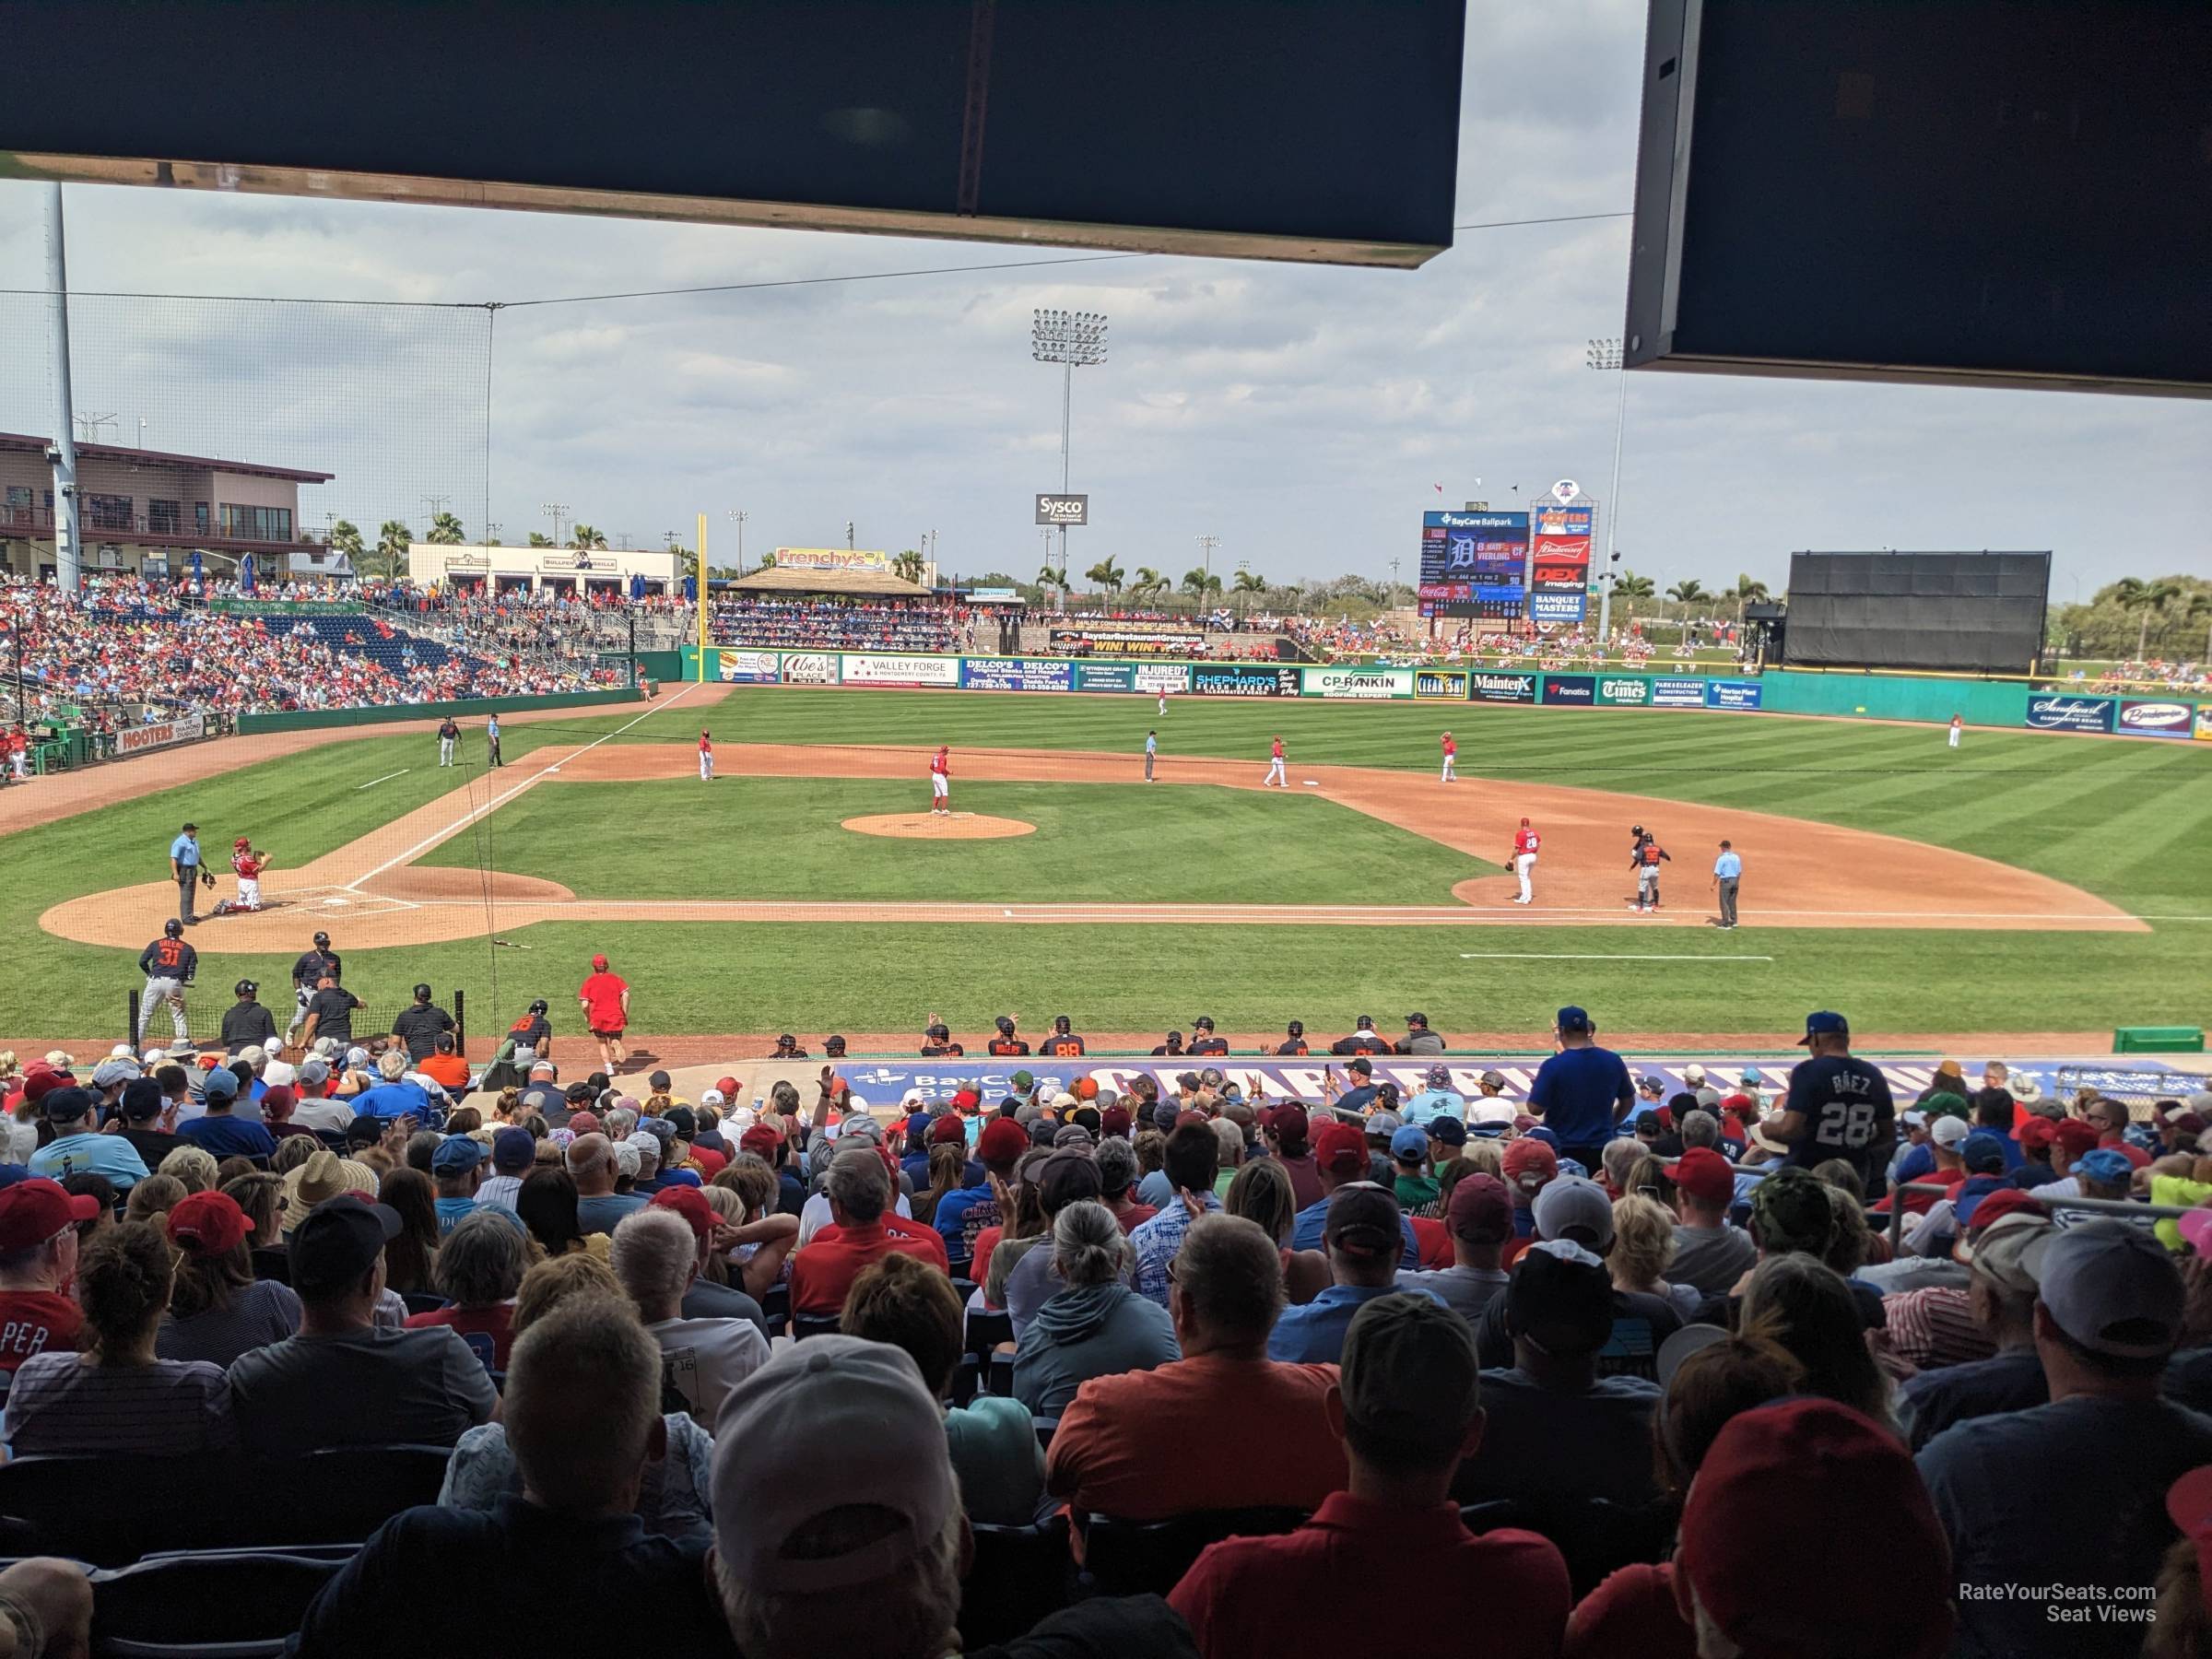 section 107, row 23 seat view  - baycare ballpark